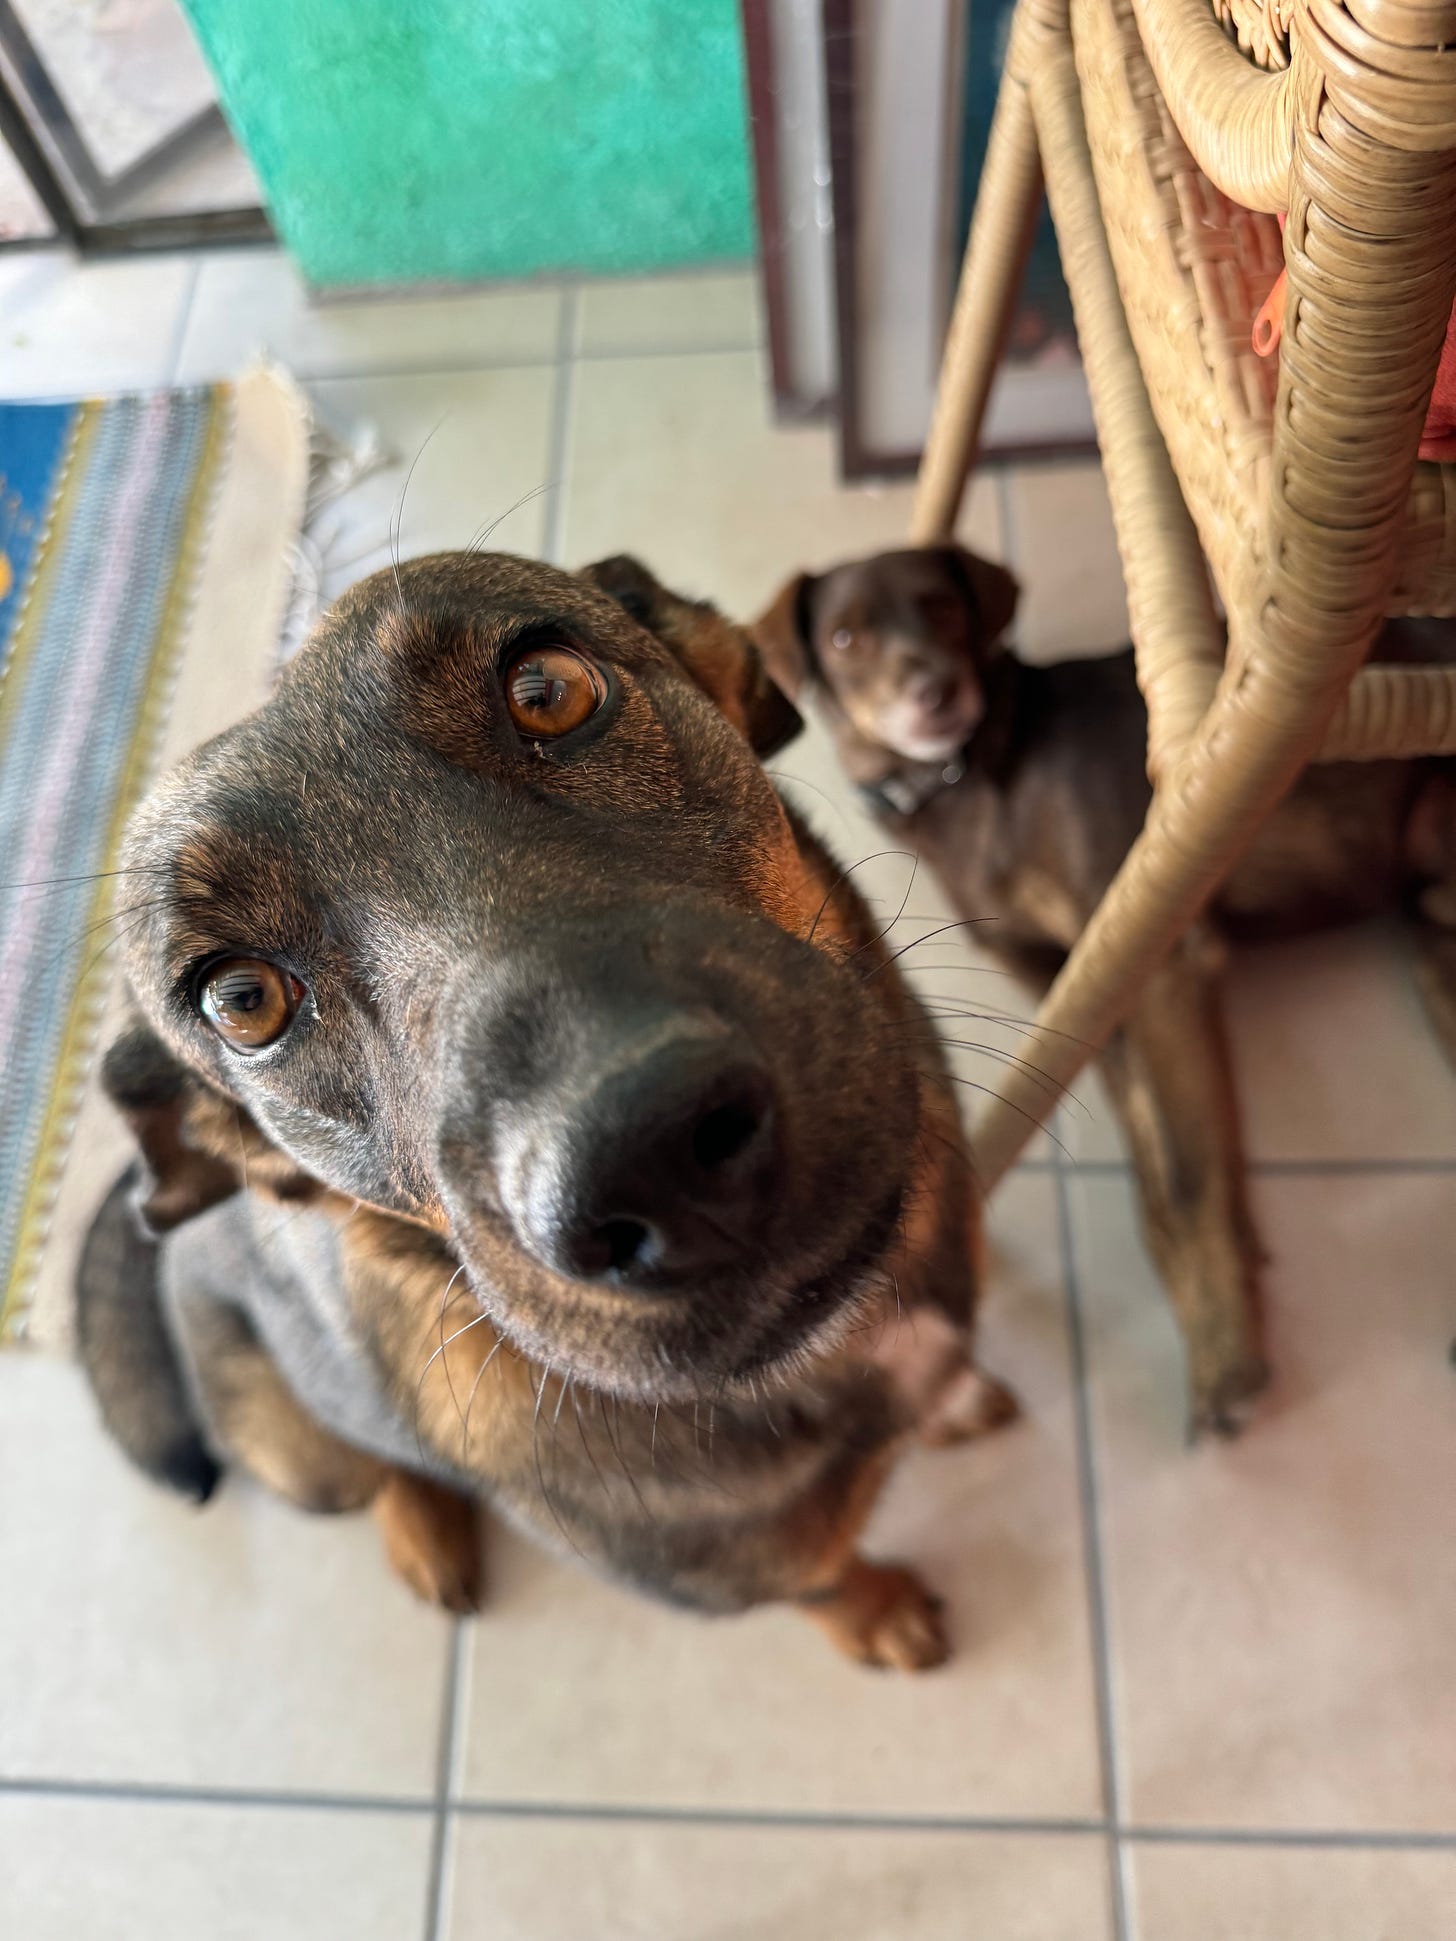 Our dogs Tigre and Loo, with Tigre taking up most of the image and Loo appearing blurred out in the background, sitting underneath a stool.